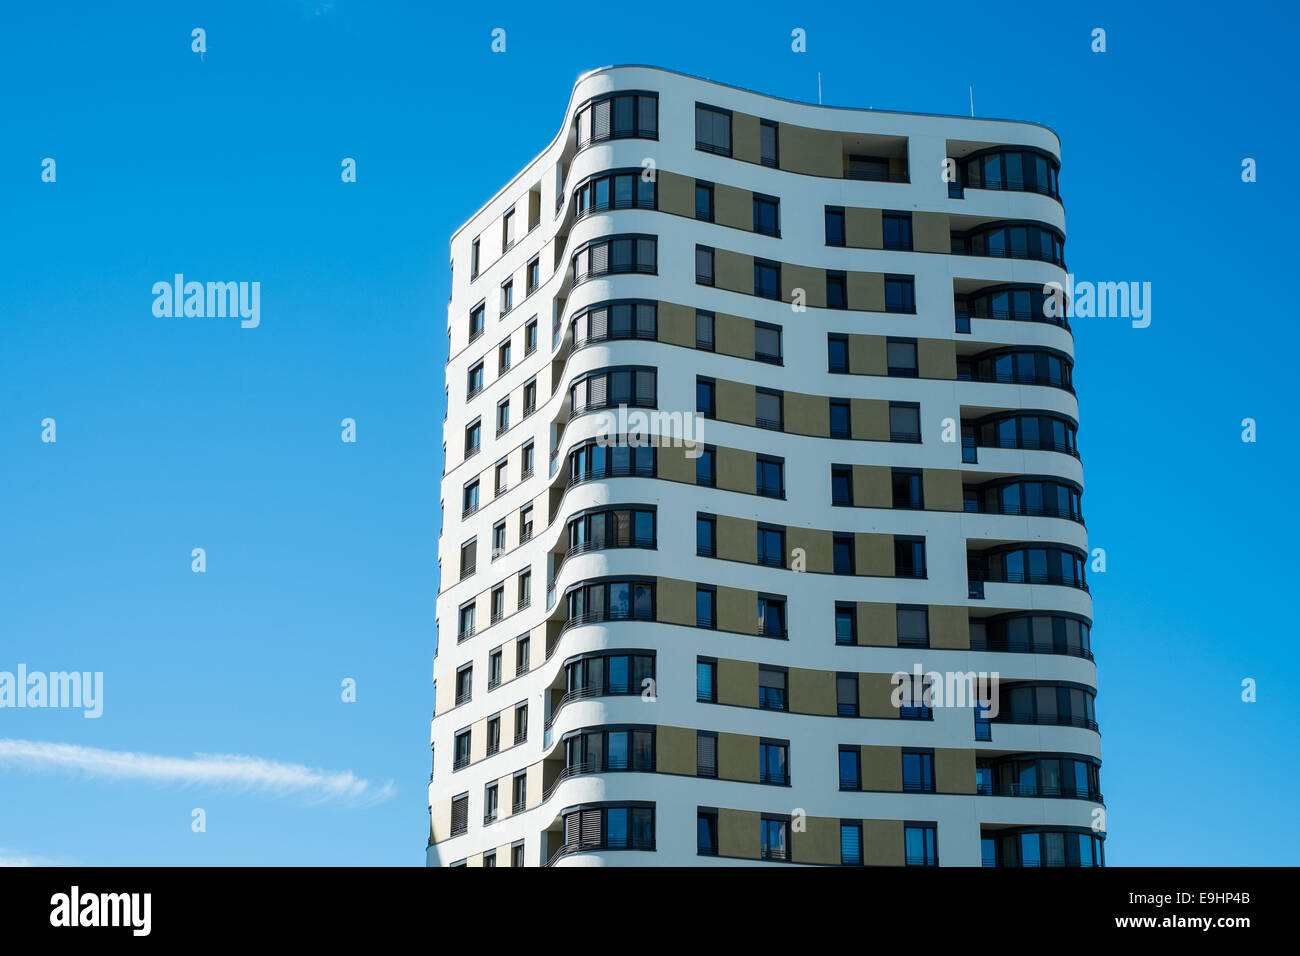 The residence tower 'Sternenhimmel' located in a development area in Munich, Germany. Stock Photo